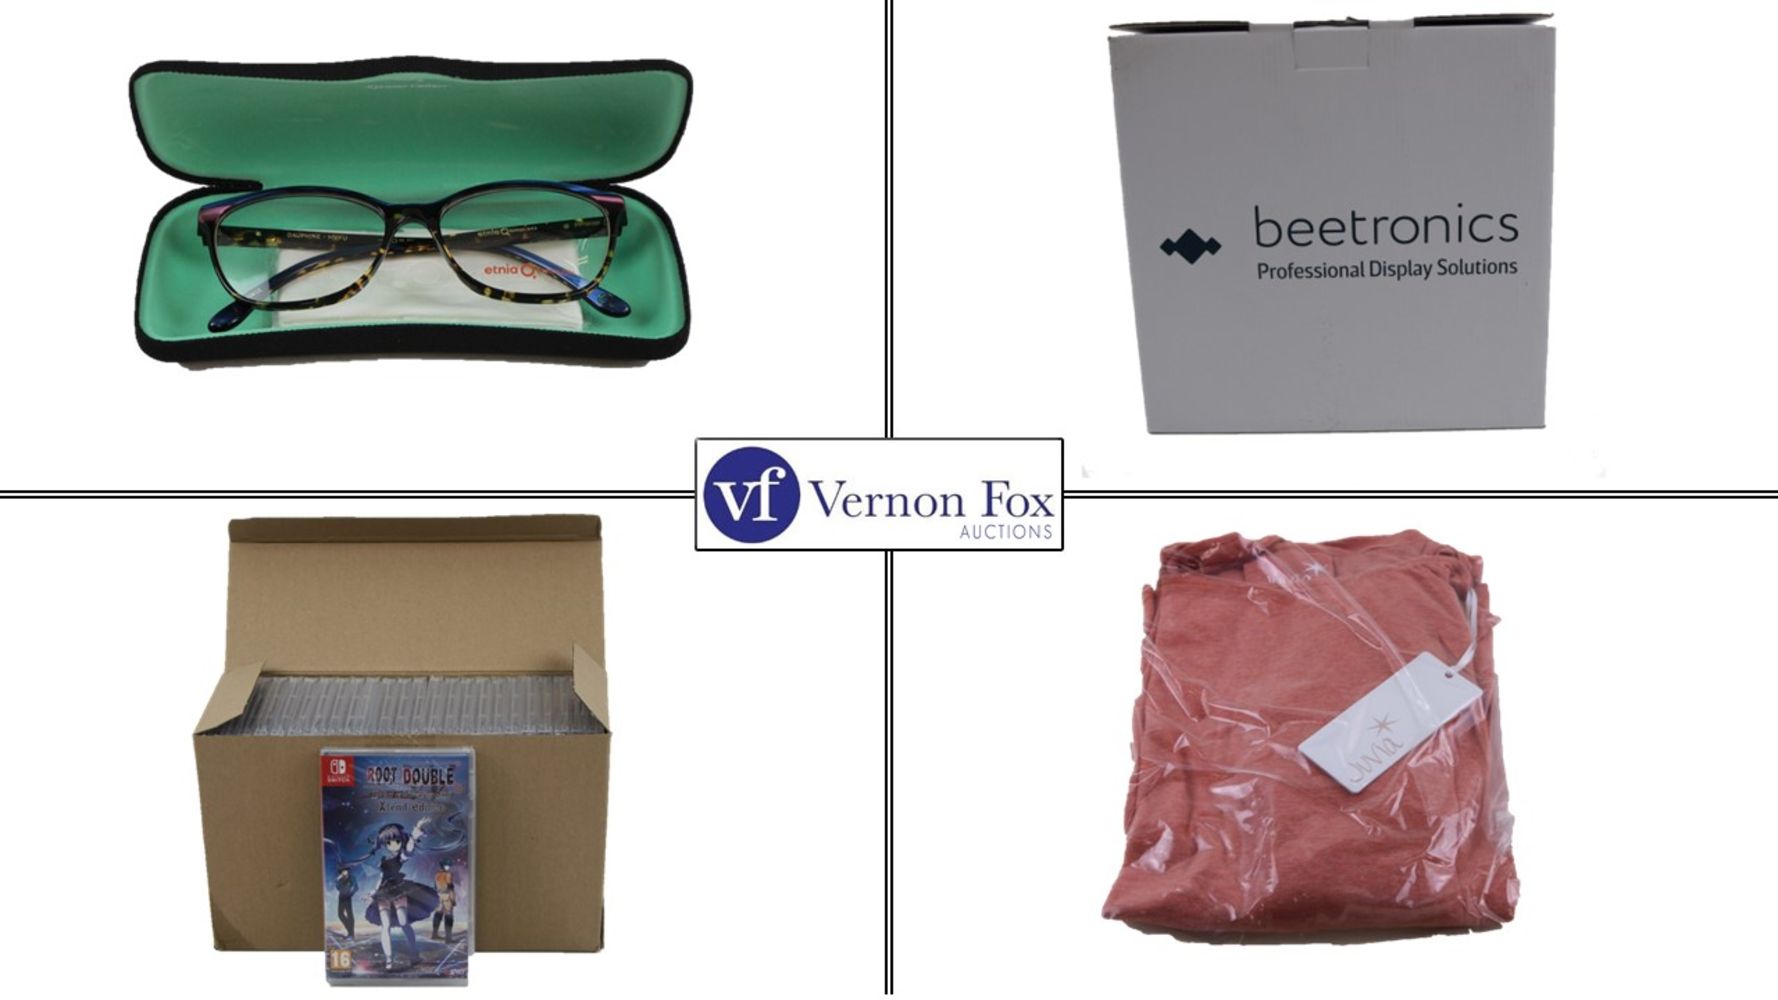 TIMED ONLINE AUCTION: A great range of Fashion, Homewares, Audio, IT and Sports Goods plus much more. FREE UK DELIVERY!